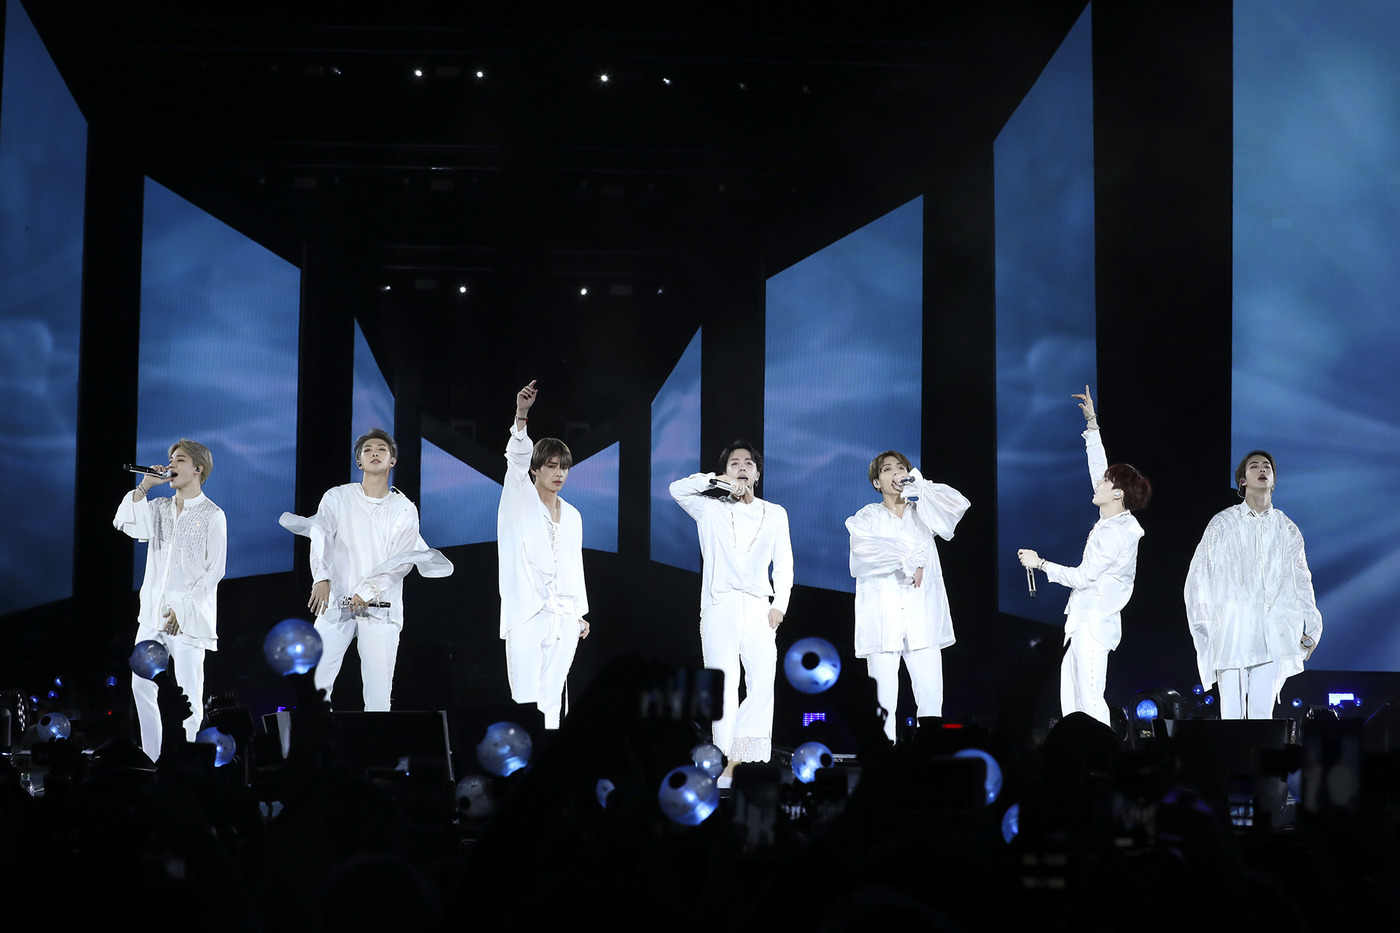 According to Cheong Wa Dae, BTS will perform at the Korean Music Sound Korean Friendship Concert held at France Paris on the 14th.One of President Moon Jae-ins European tours to attend the ASEM summit is to share his schedule at France.The Korean Friendship Concert will share the echo of Korean music with about 400 attendees including 200 people including France major people and cultural artists, 100 Korean Wave lovers and 20 Korean students from Paris 7 universities.President Moon Jae-in attends the show.Earlier, it was reported that BTS received a decoration of the Hwagwan culture awarded by the government in recognition of its contribution to the spread of Korean Wave.Prime Minister Lee Nak-yeon said, Many young people from foreign countries have contributed to the spread of Korean Wave and the spread of Hangul, such as singing Korean lyrics.Previously, Cy, Bae Yong Joon, Lee Mija, and Cho Yong Pil were awarded the decoration, and BTS wrote the record of being awarded for the first time as an idol group.In addition, BTS was the first Korean singer to decorate the global cover of United States of America Time magazine.On the 10th (local time), United States of Americas Time released an interview with Cover, which was modeled by BTS, on its official website.Time said in an article entitled How BTS Conquers the World, BTS is playing listenable music like the Beatles and One Direction, and it shows dances reminiscent of New Kids on the Block and the En Sink, but it is pioneering a new path of BTS alone.Asked that the lyrics of Idol are currently showing the status of BTS, RM said, Love yourself is the center of BTS identity. There are many difficulties in life, but it is most important to live a life that is satisfied with oneself.Even if there is a language barrier, the fans reaction to music is the same, Sugar said. Music is making us one.I wonder if there will be a chance to perform at the Super Bowl someday, he said.BTS is currently on a Love Your Self world tour.It is the first and shortest time record every day, starting with appearing on the signboard talk show of each broadcaster in United States of America.On the 6th (local time), Korea Singer opened the Love Youself concert at the New York City Field Stadium for the first time and communicated with 40,000 United States of America fans.After finishing the North American tour, BTS moves to Europe and performs London, Amsterdam, Berlin and Paris.